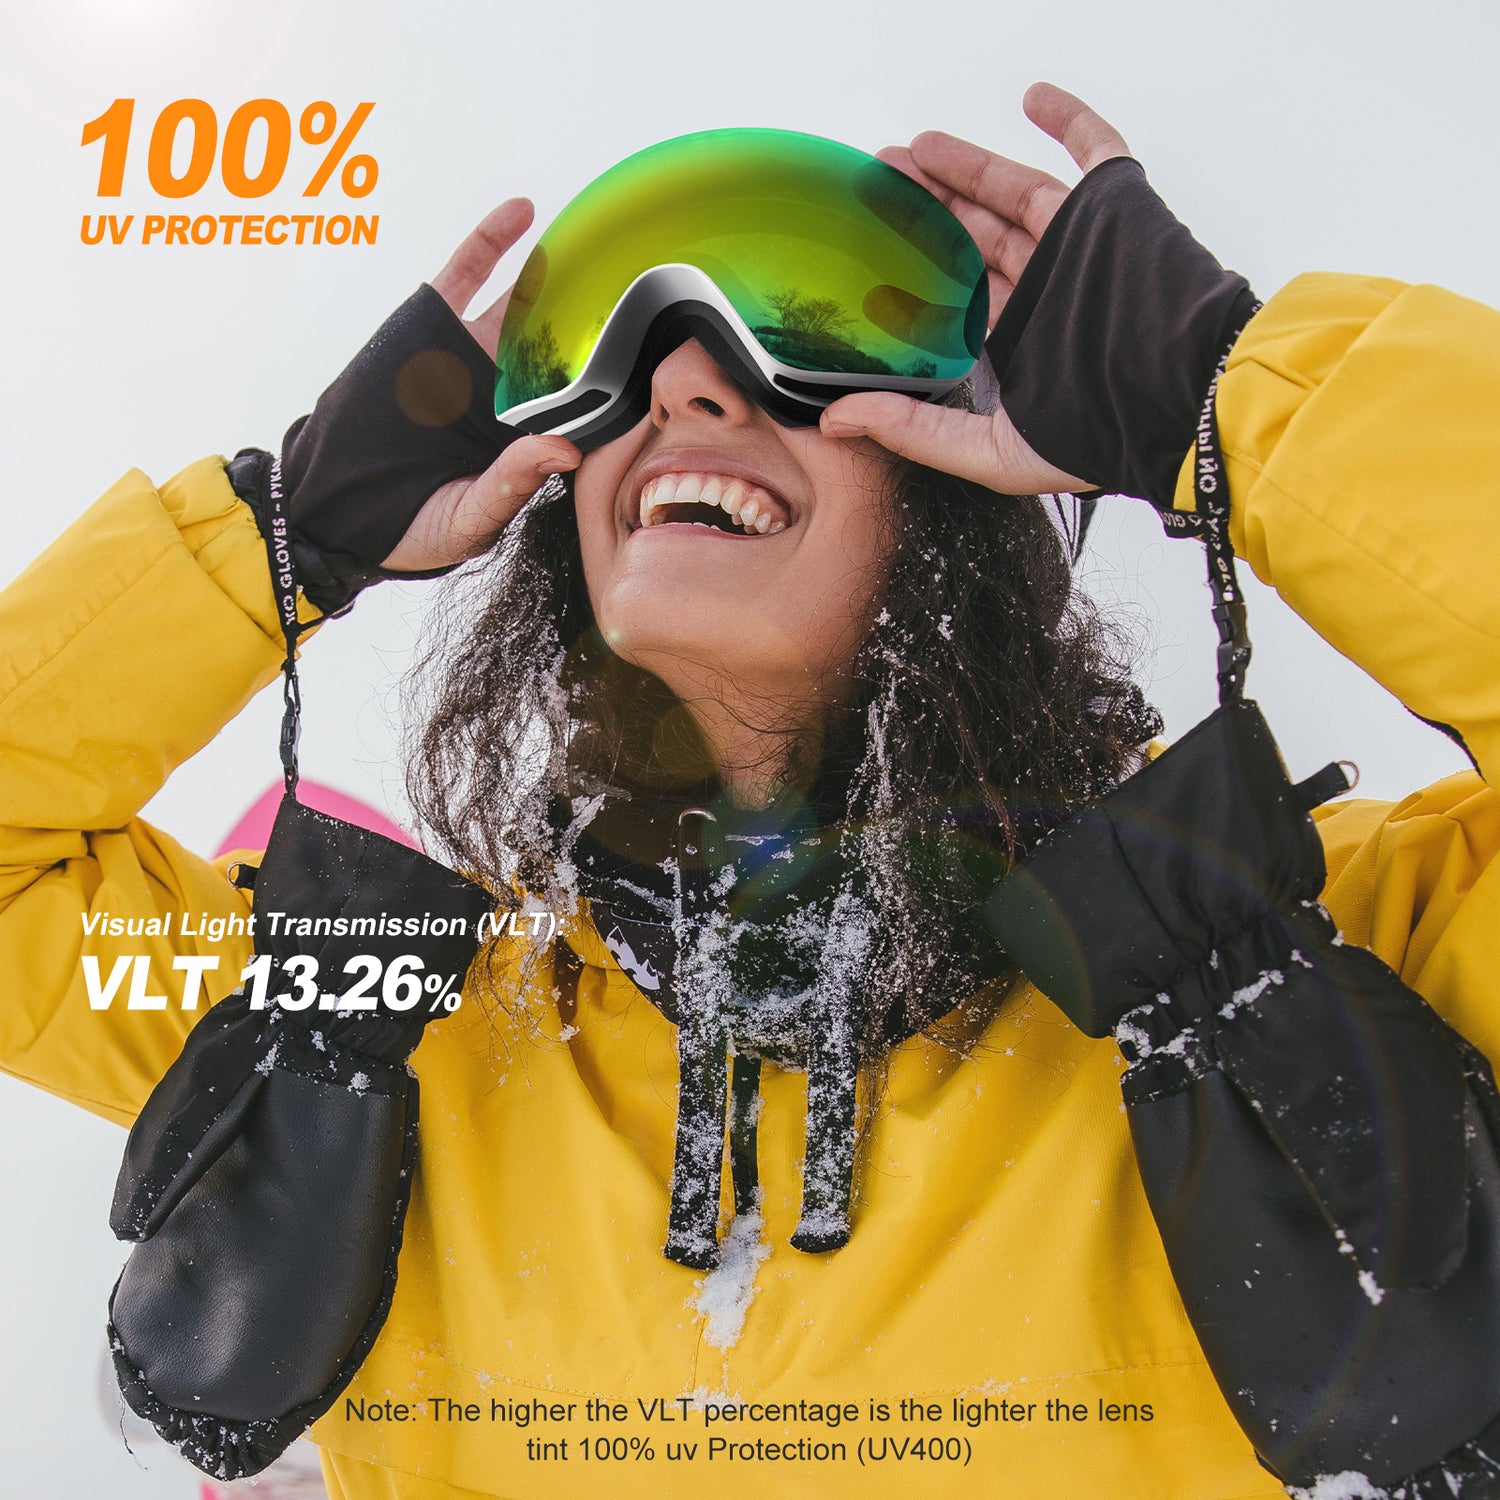 a women wears snow goggles for skiing